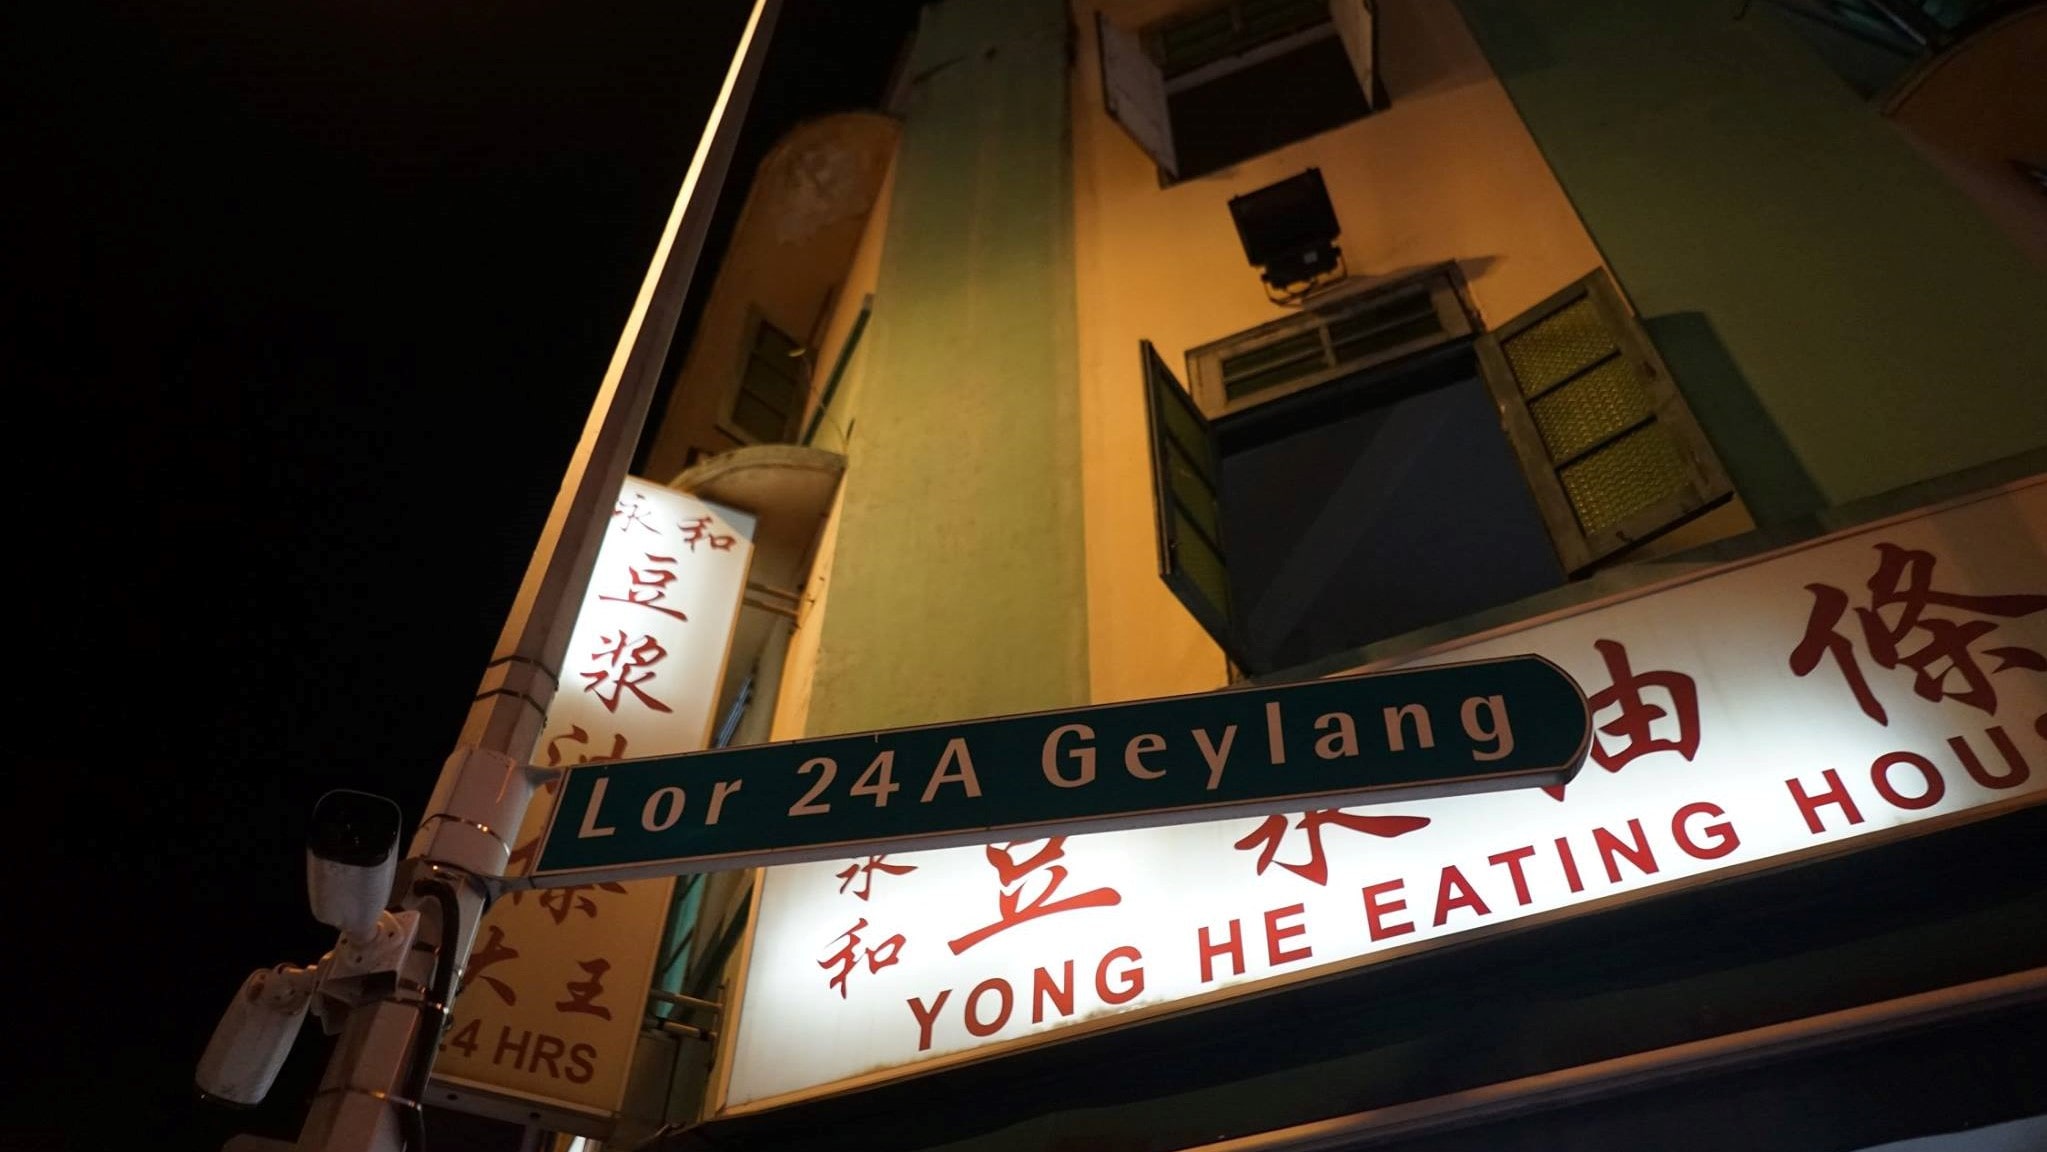 A grittier alternative is Geylang Adventures, which takes you on a guided tour of Geylang, Singapore’s red-light district. Photo from Geylang Adventures